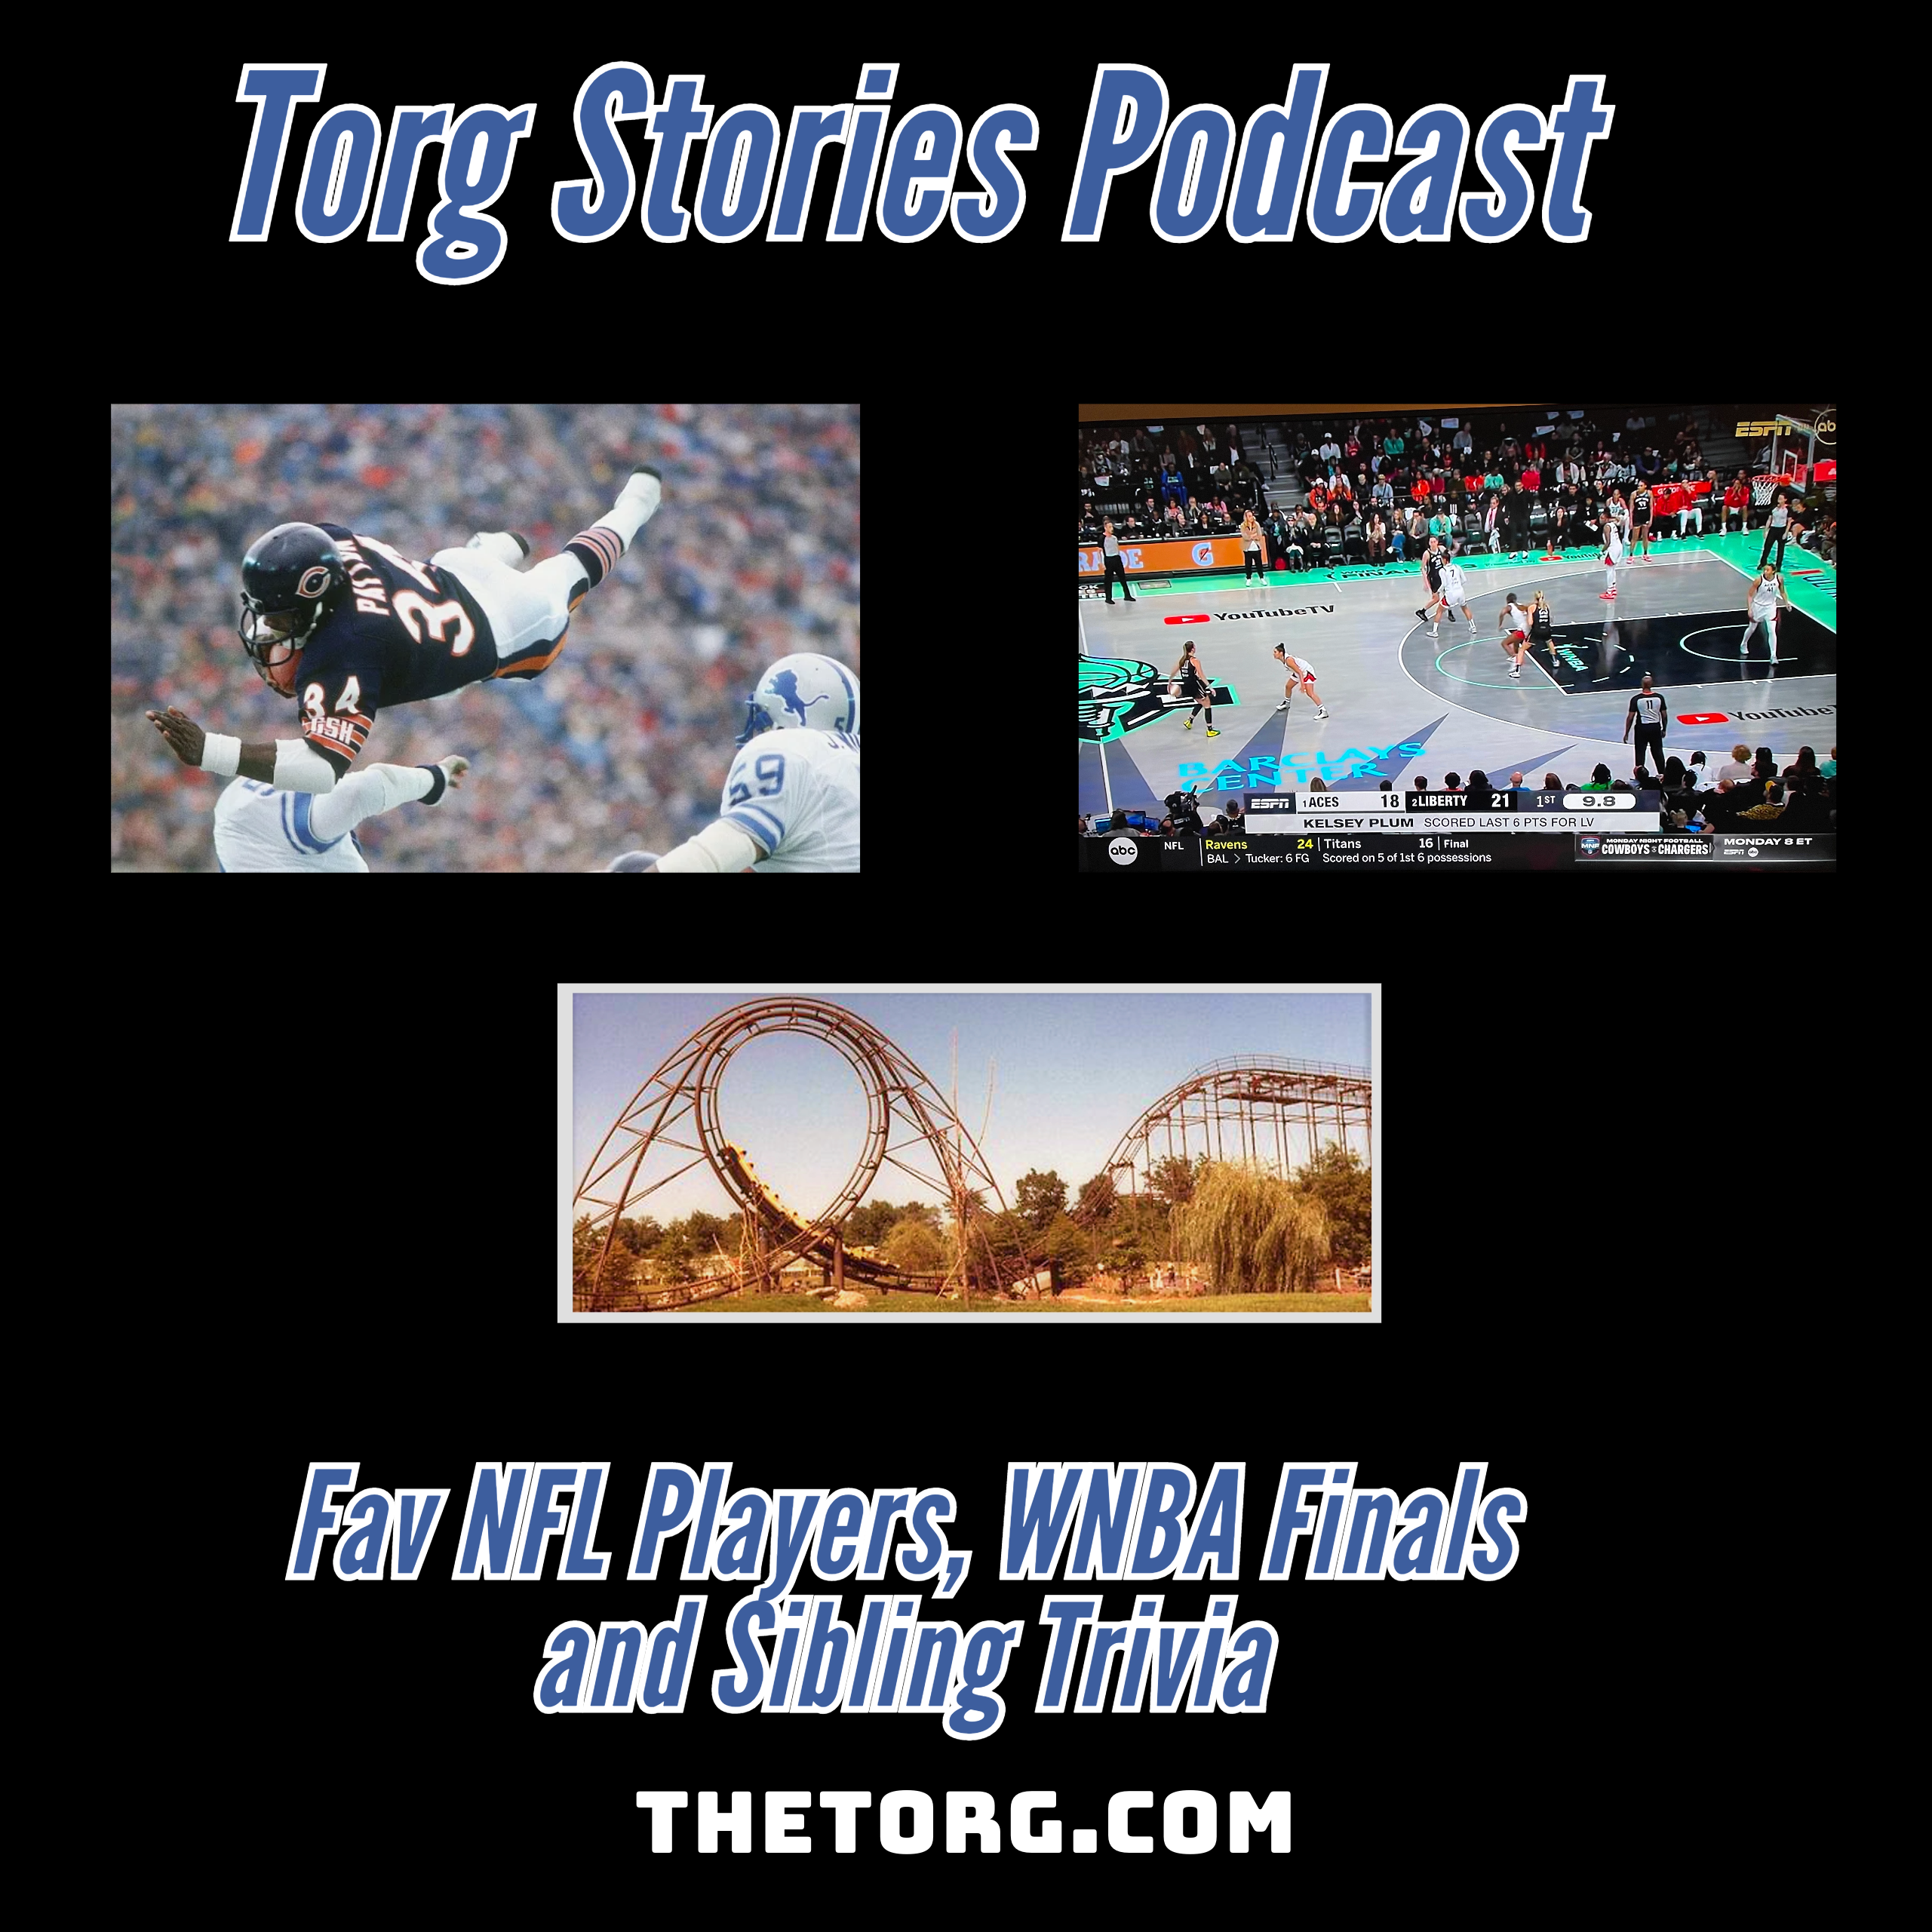 Podcast: Fav NFL Players, Sibling Trivia, and Kings Island Memories